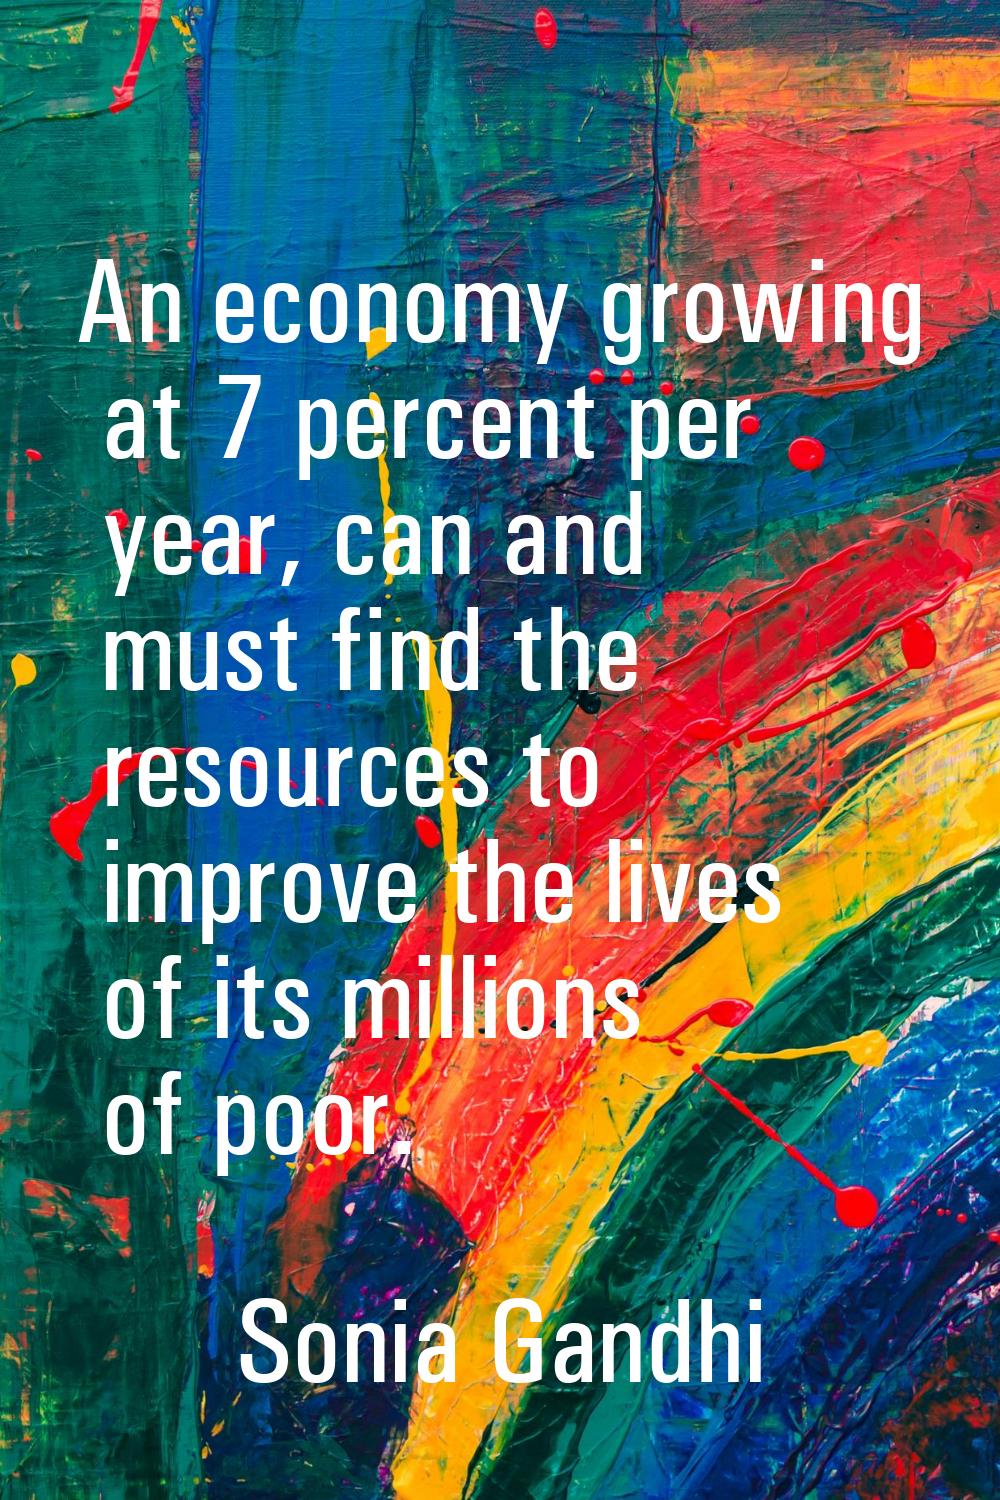 An economy growing at 7 percent per year, can and must find the resources to improve the lives of i